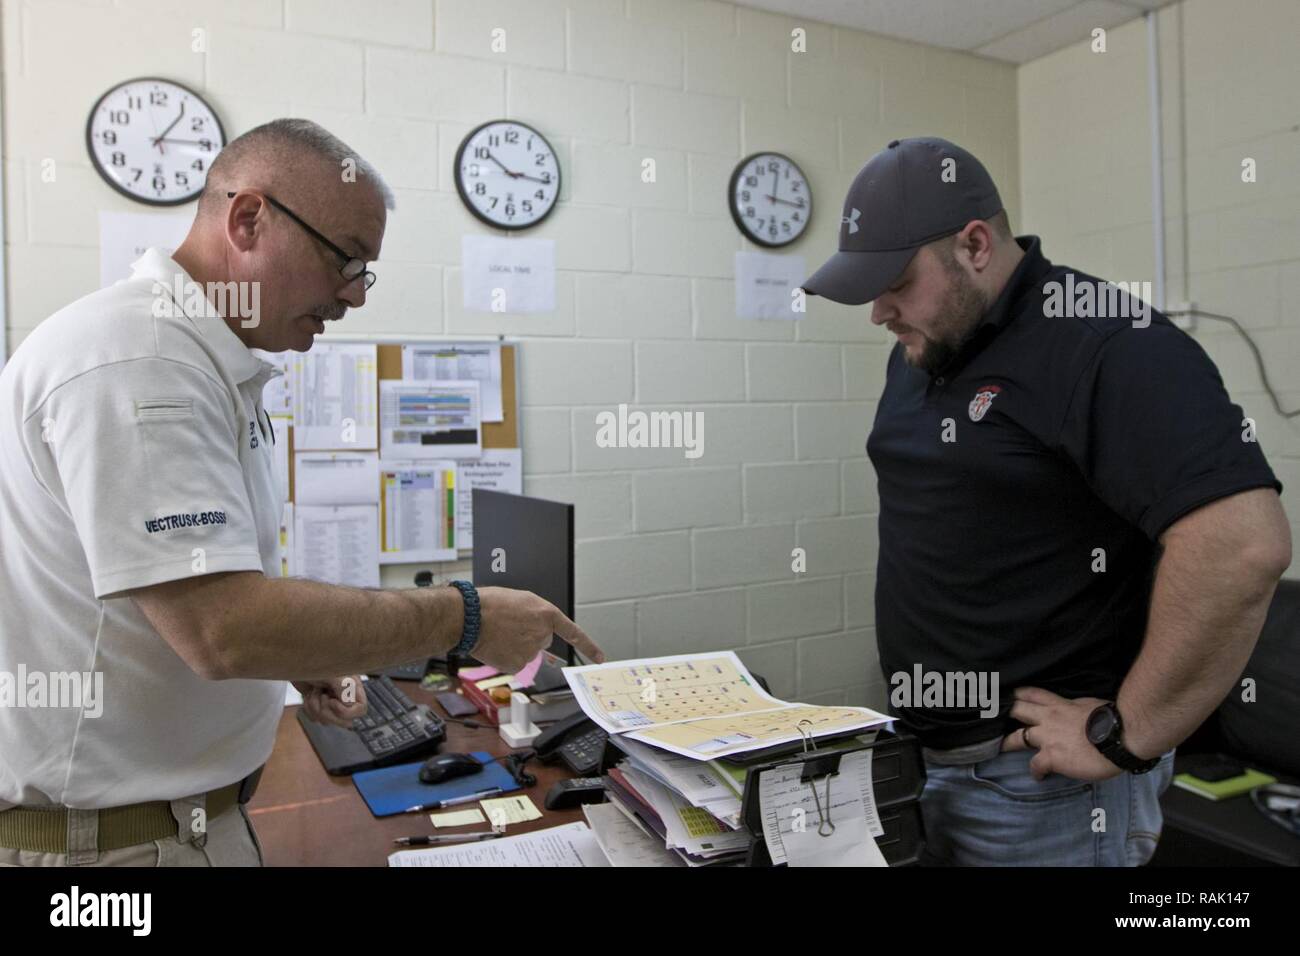 James Wenger, Assistant Chief for the Area Support Group – Kuwait joint emergency service station, (left), shows James Lyndsey, an Explosives Safety Specialist with the U.S. Army Defense Ammunition Center, (right), documents and maps during the 2017 Worldwide Ammunition Logistics and Explosives Safety Review in Camp Arifjan, Kuwait, on Feb. 7, 2017. Stock Photo